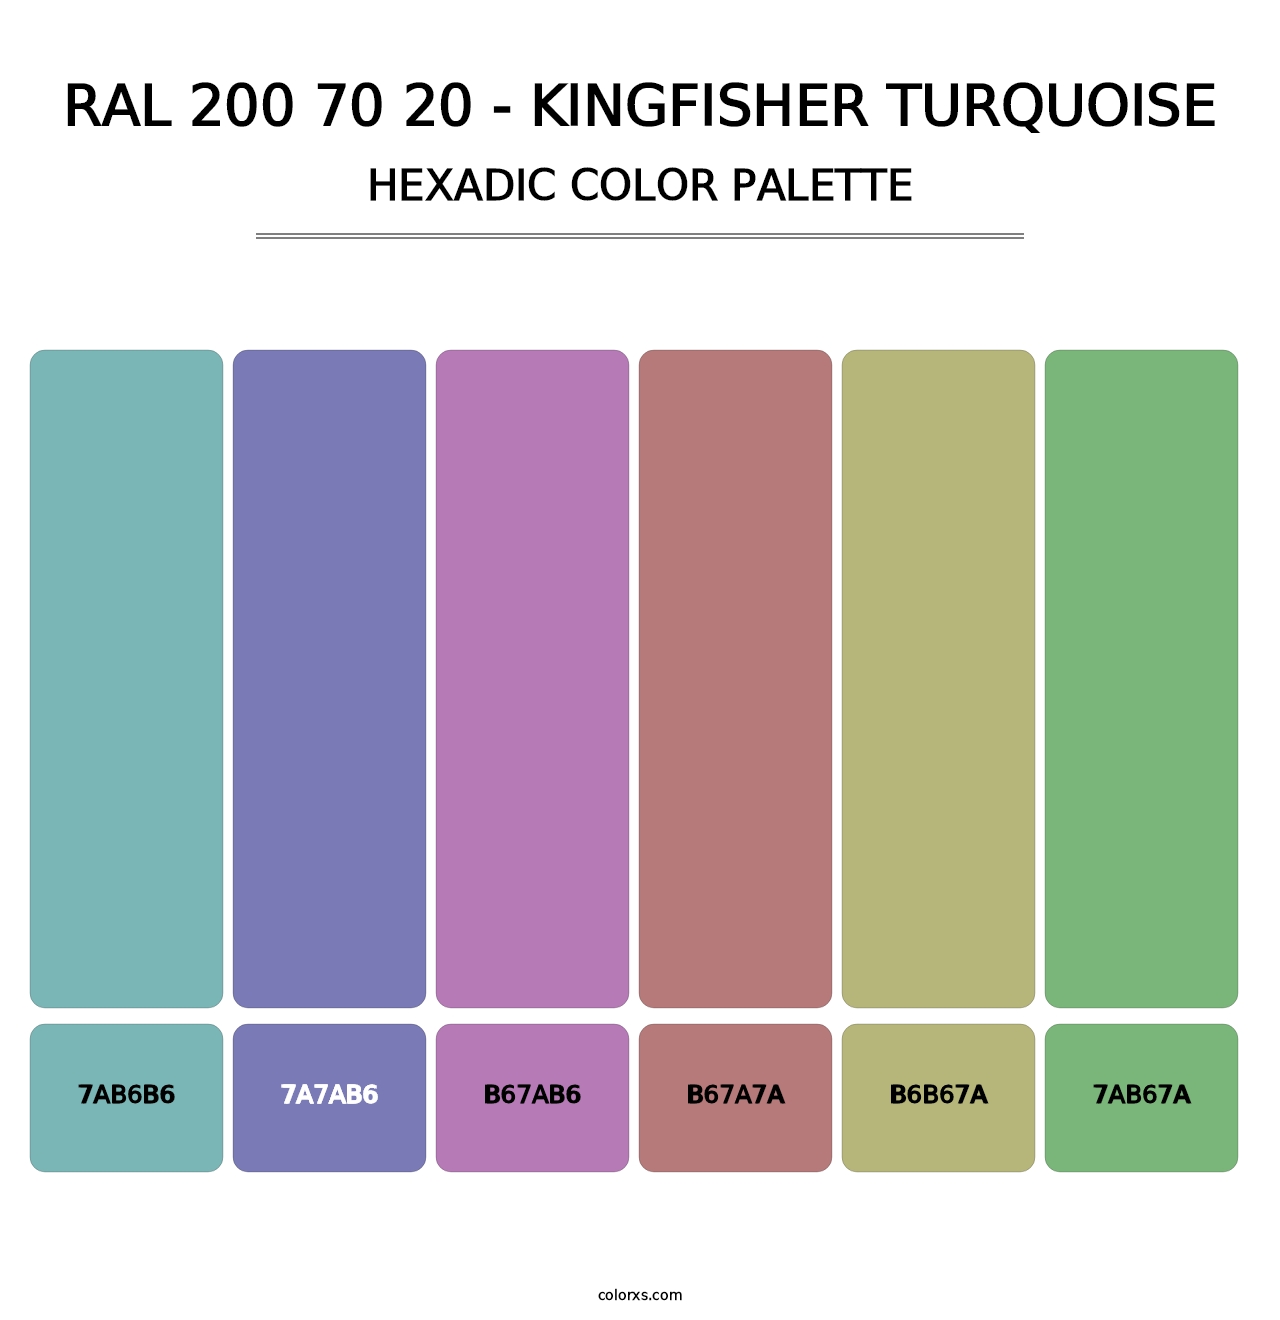 RAL 200 70 20 - Kingfisher Turquoise - Hexadic Color Palette